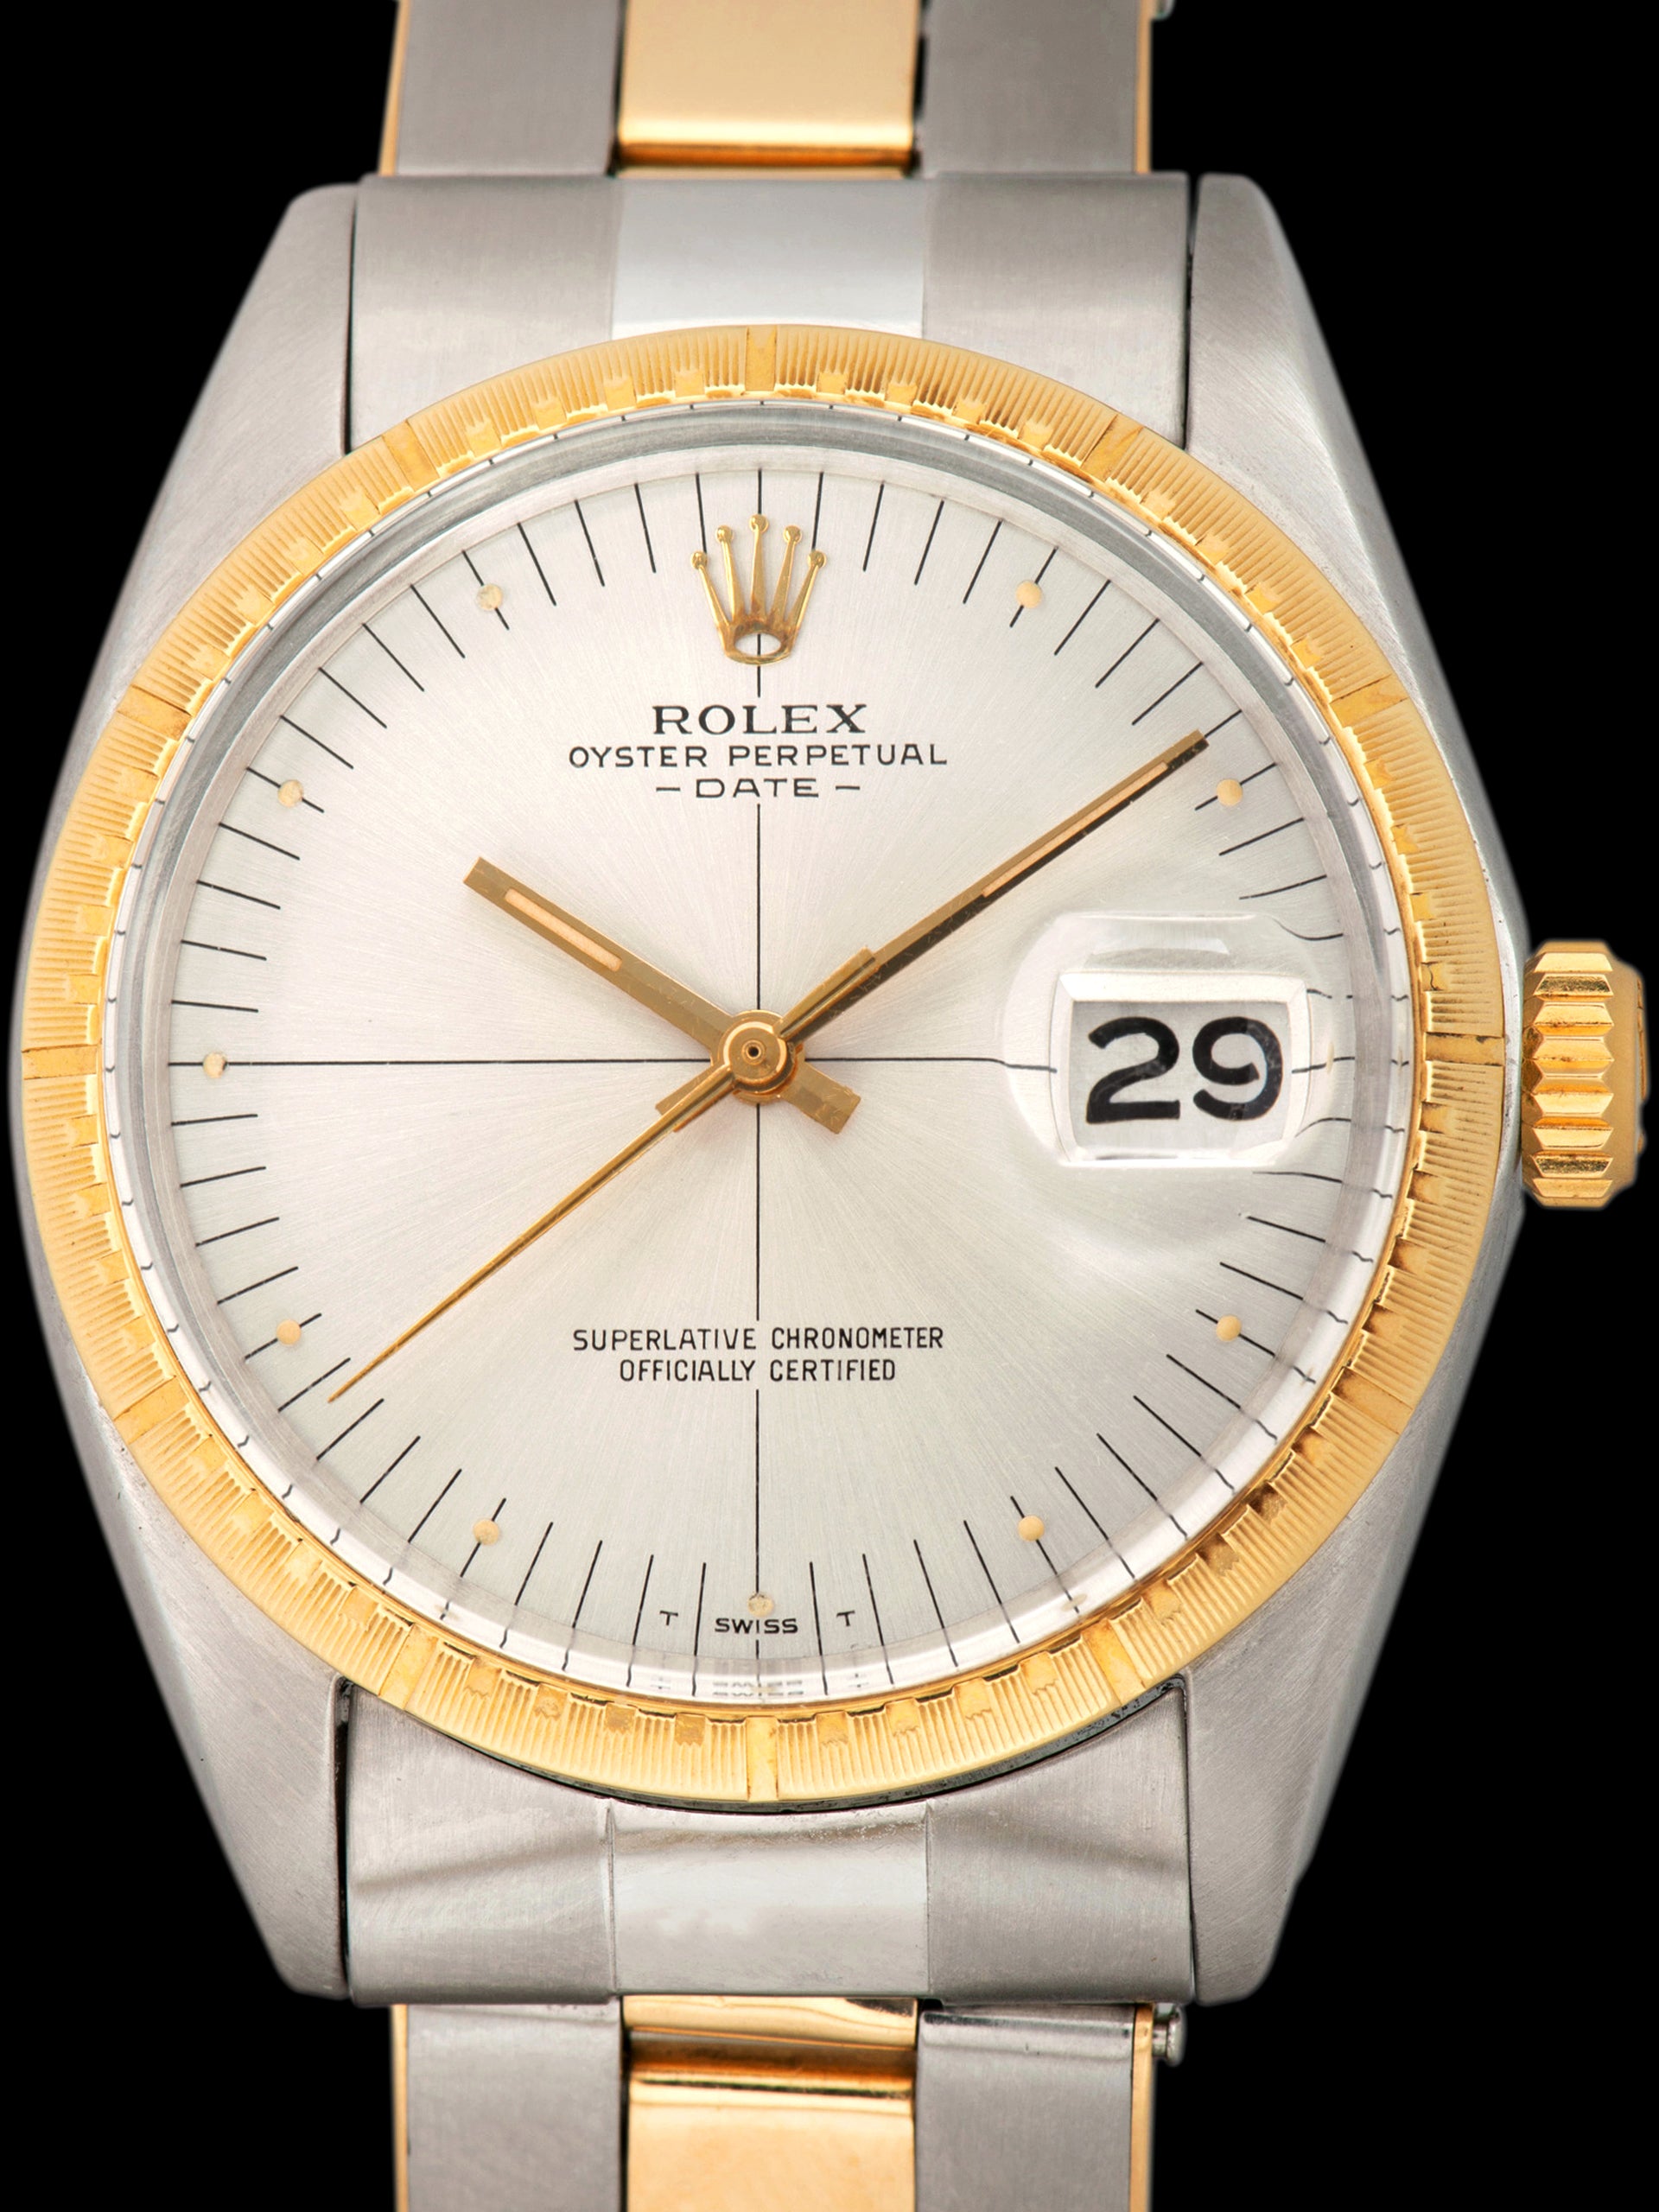 1971 Rolex Two-Tone Oyster-Perpetual Date (Ref. 1512) "Zephyr"